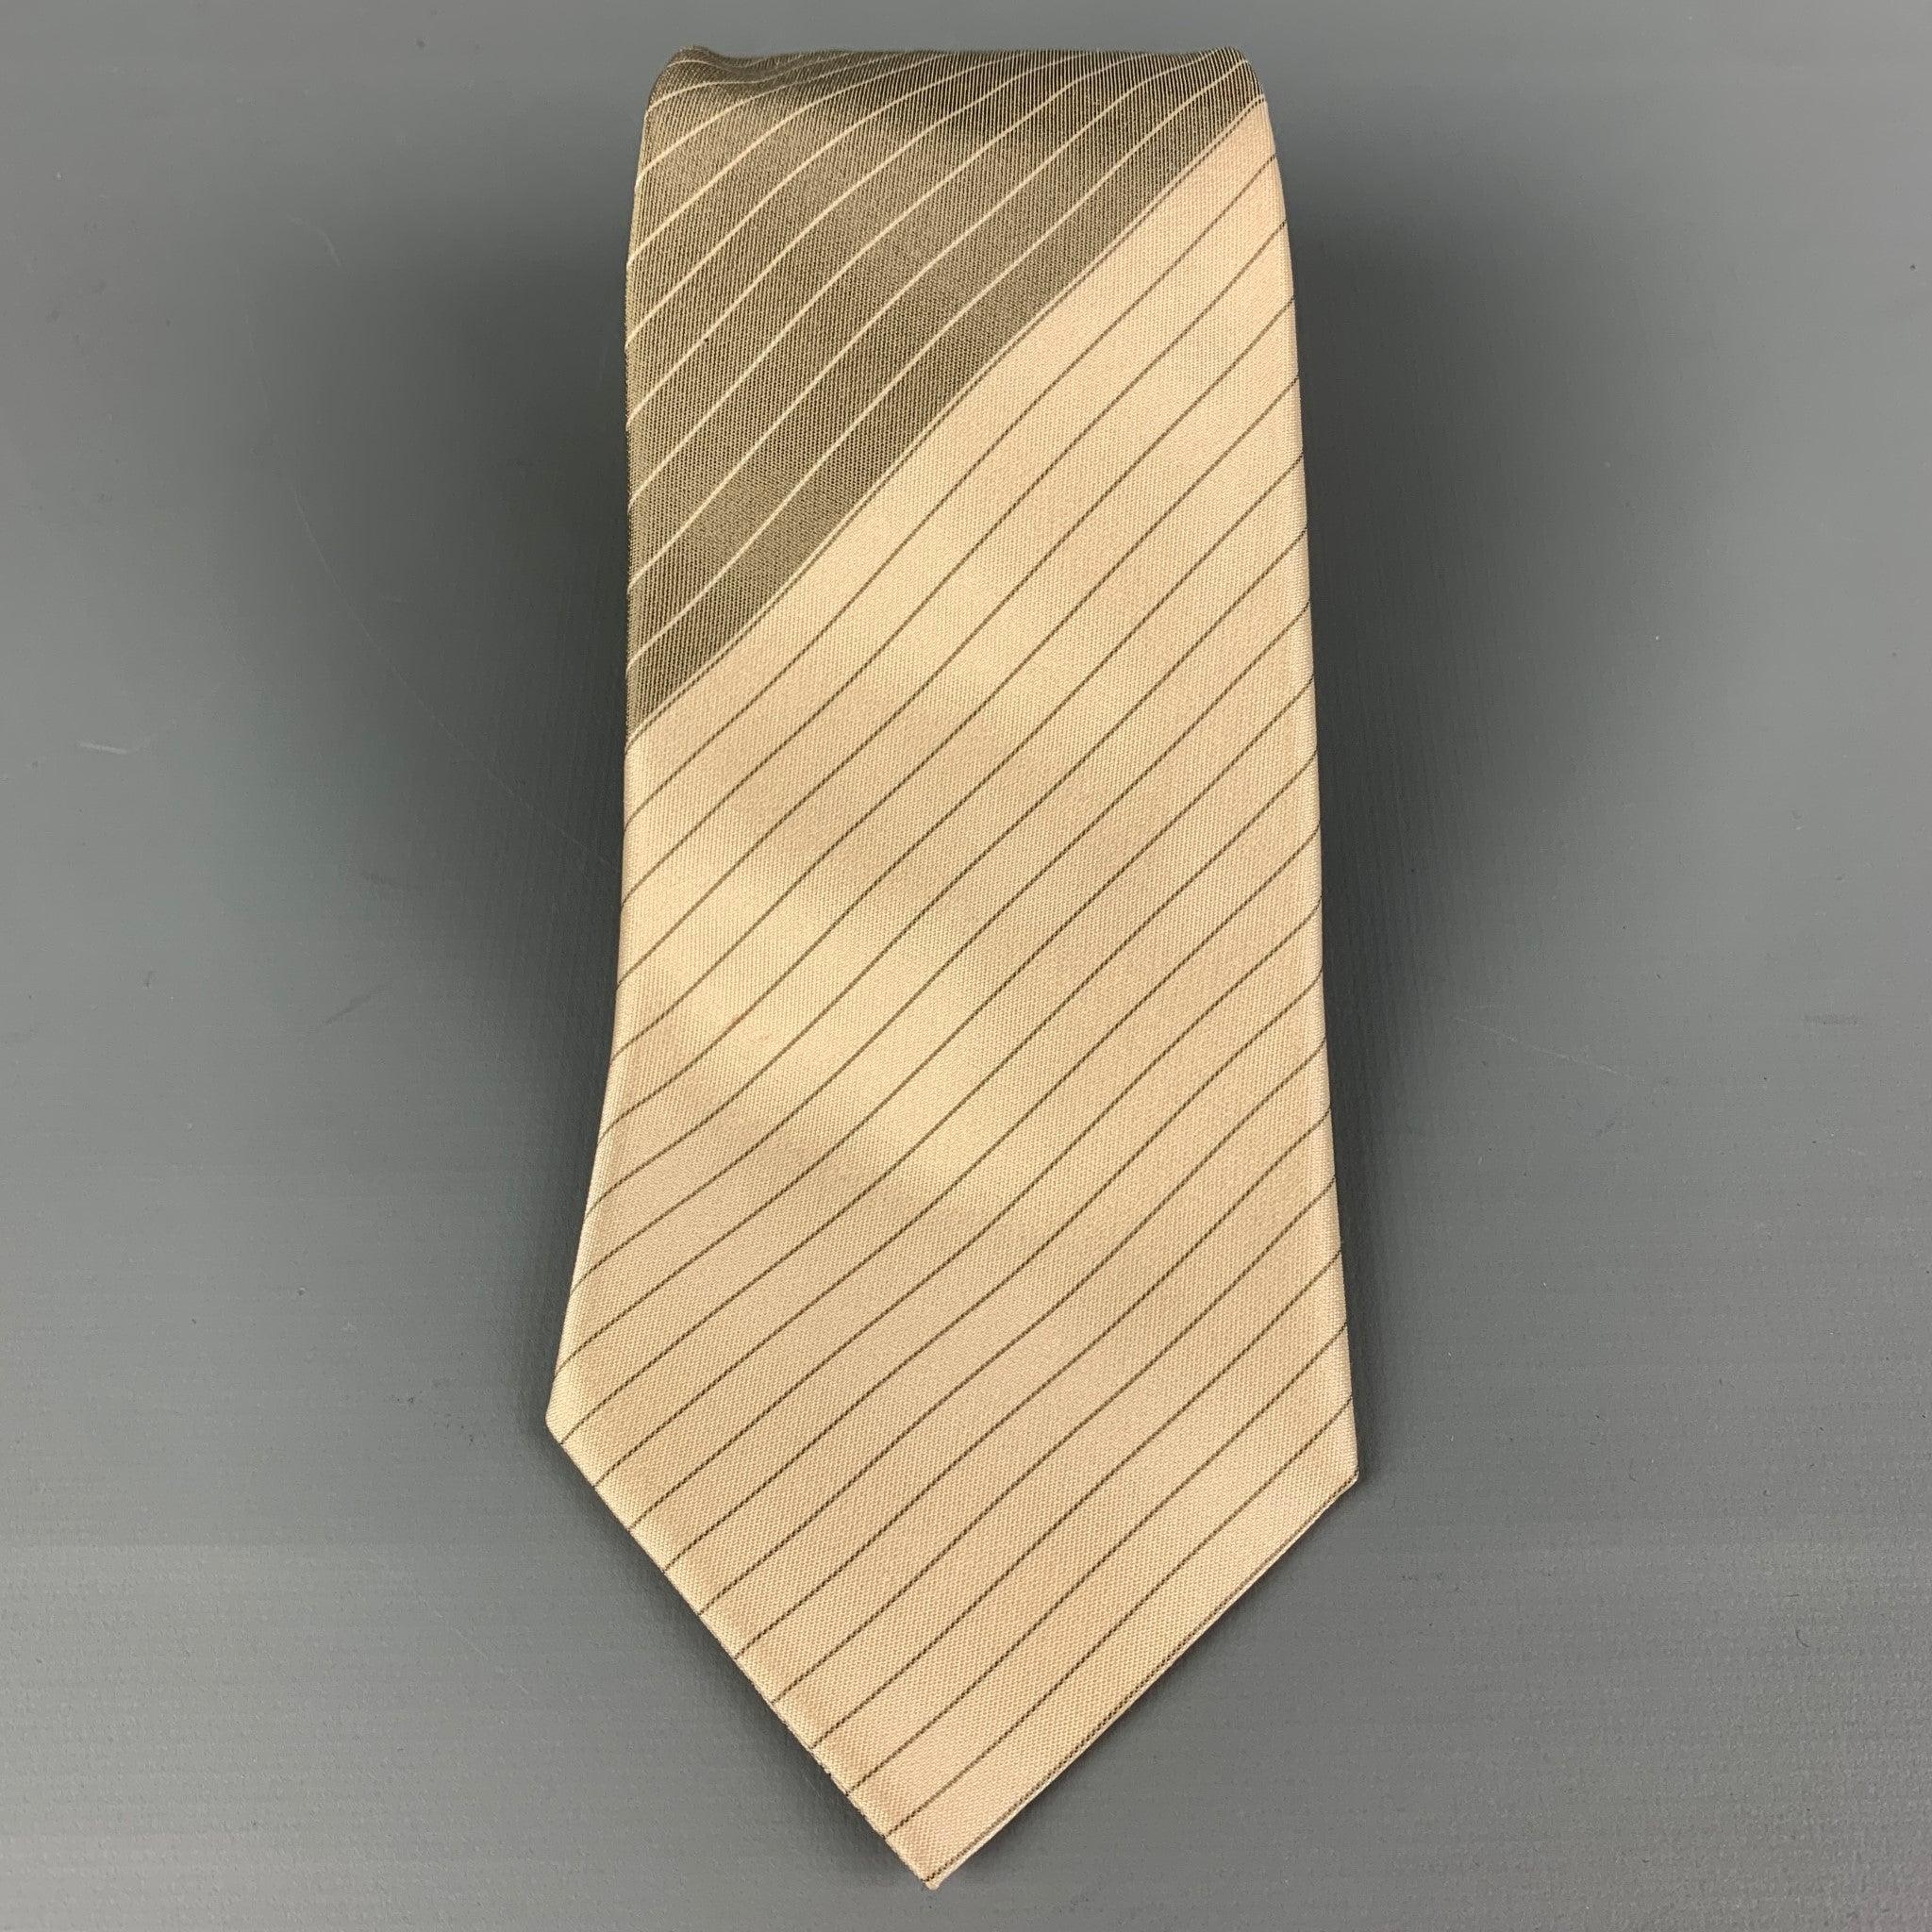 JIL SANDER
necktie comes in a beige & grey silk twill with a all over diagonal stripe print. Made in Italy. Very Good Pre-Owned Condition.Width: 3.25 inches 
  
  
 
Reference: 118898
Category: Tie
More Details
    
Brand:  JIL SANDER
Gender: 